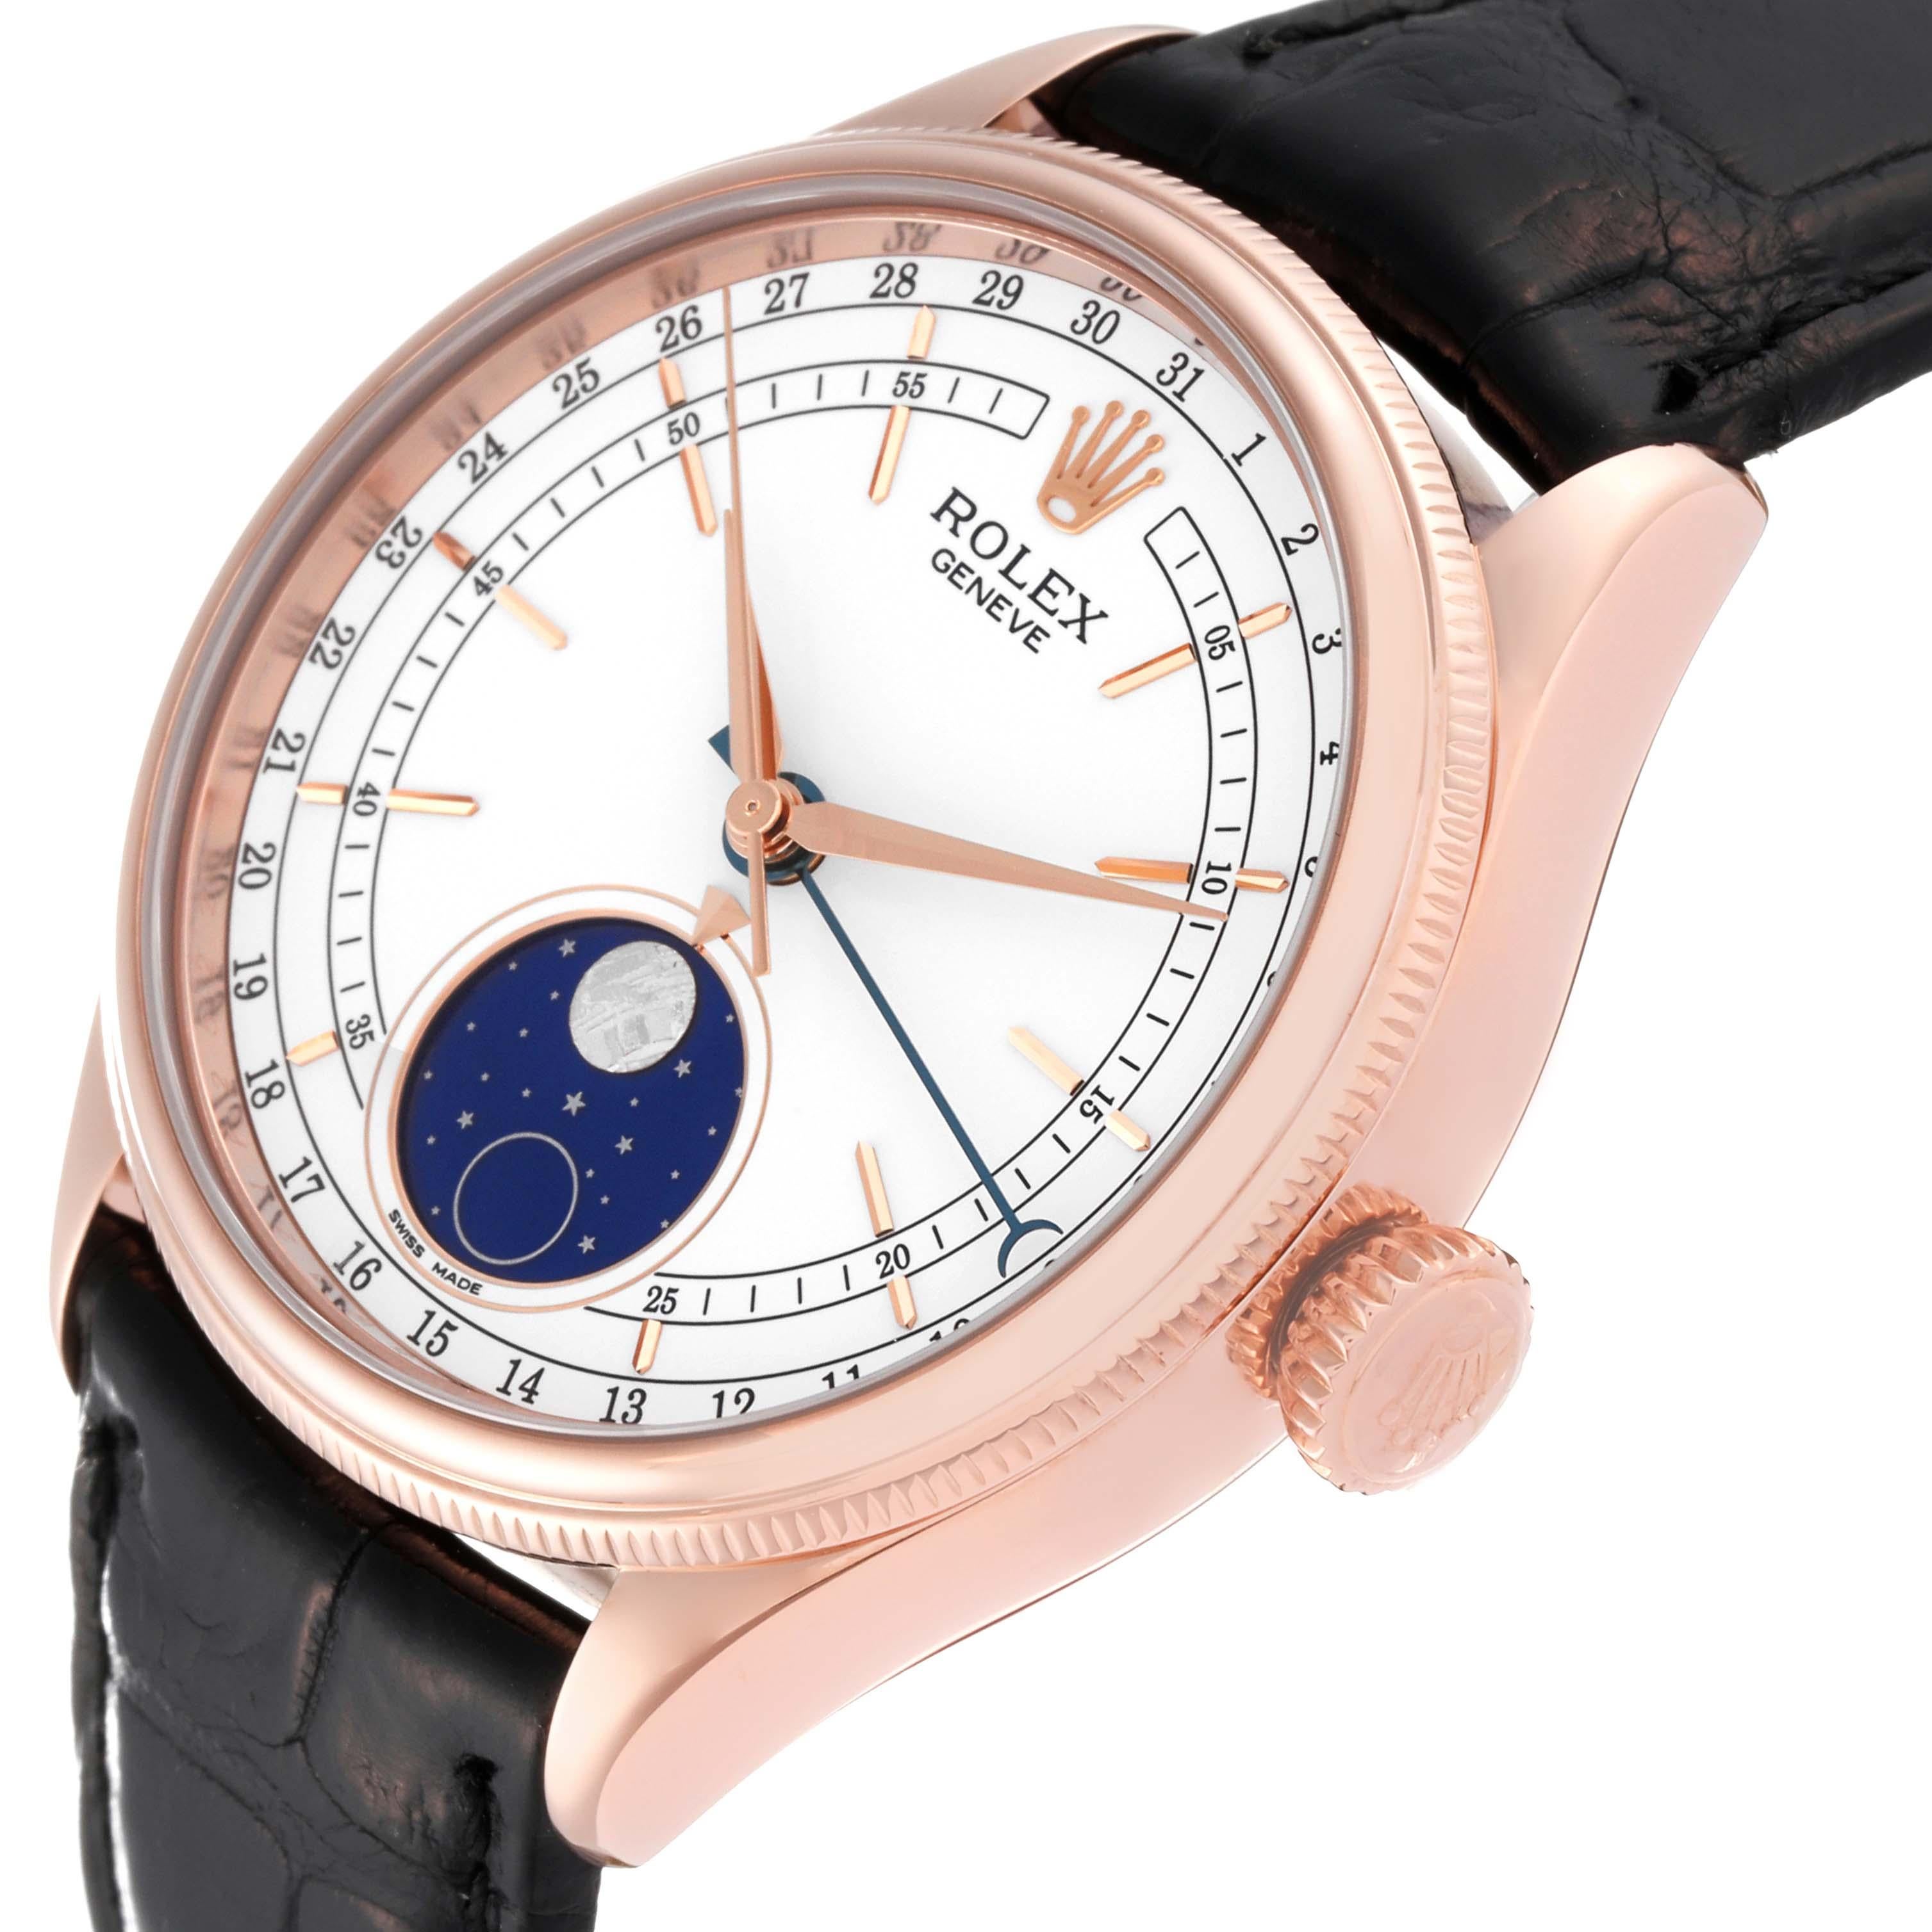 Rolex Cellini Moonphase White Dial Rose Gold Mens Watch 50535 4